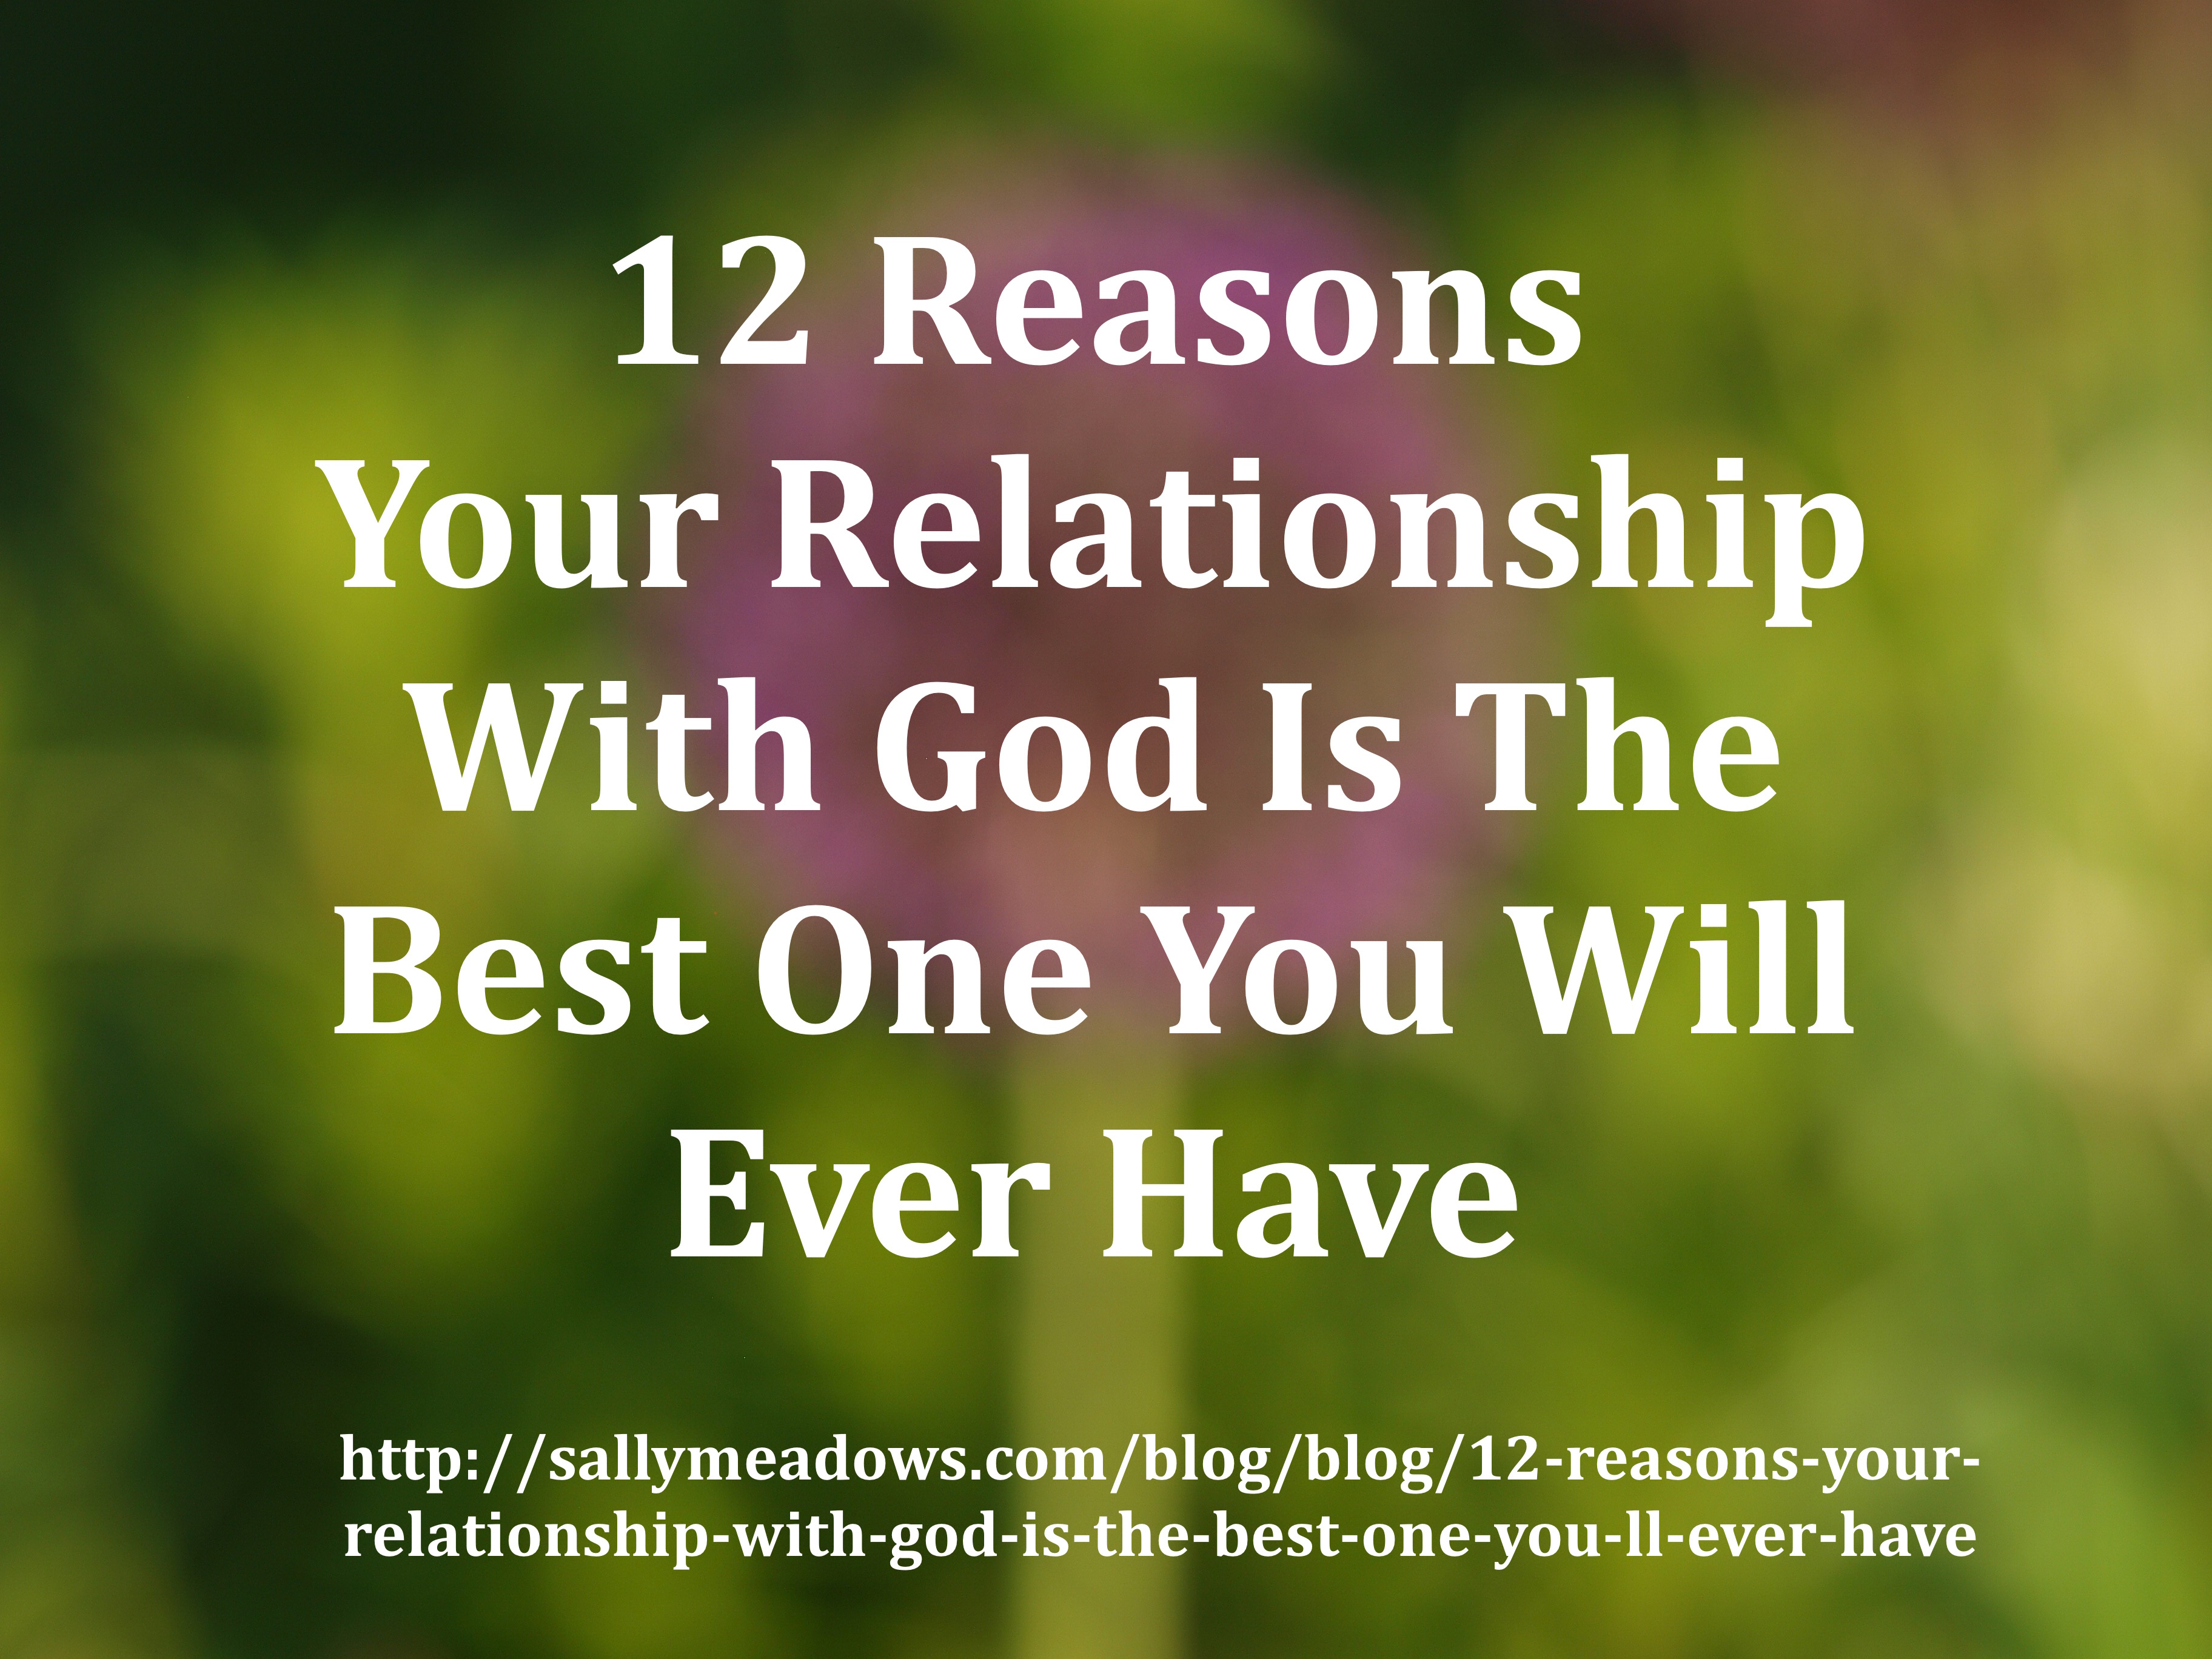 12 REASONS YOUR RELATIONSHIP WITH GOD IS THE BEST ONE YOU'LL EVER HAVE